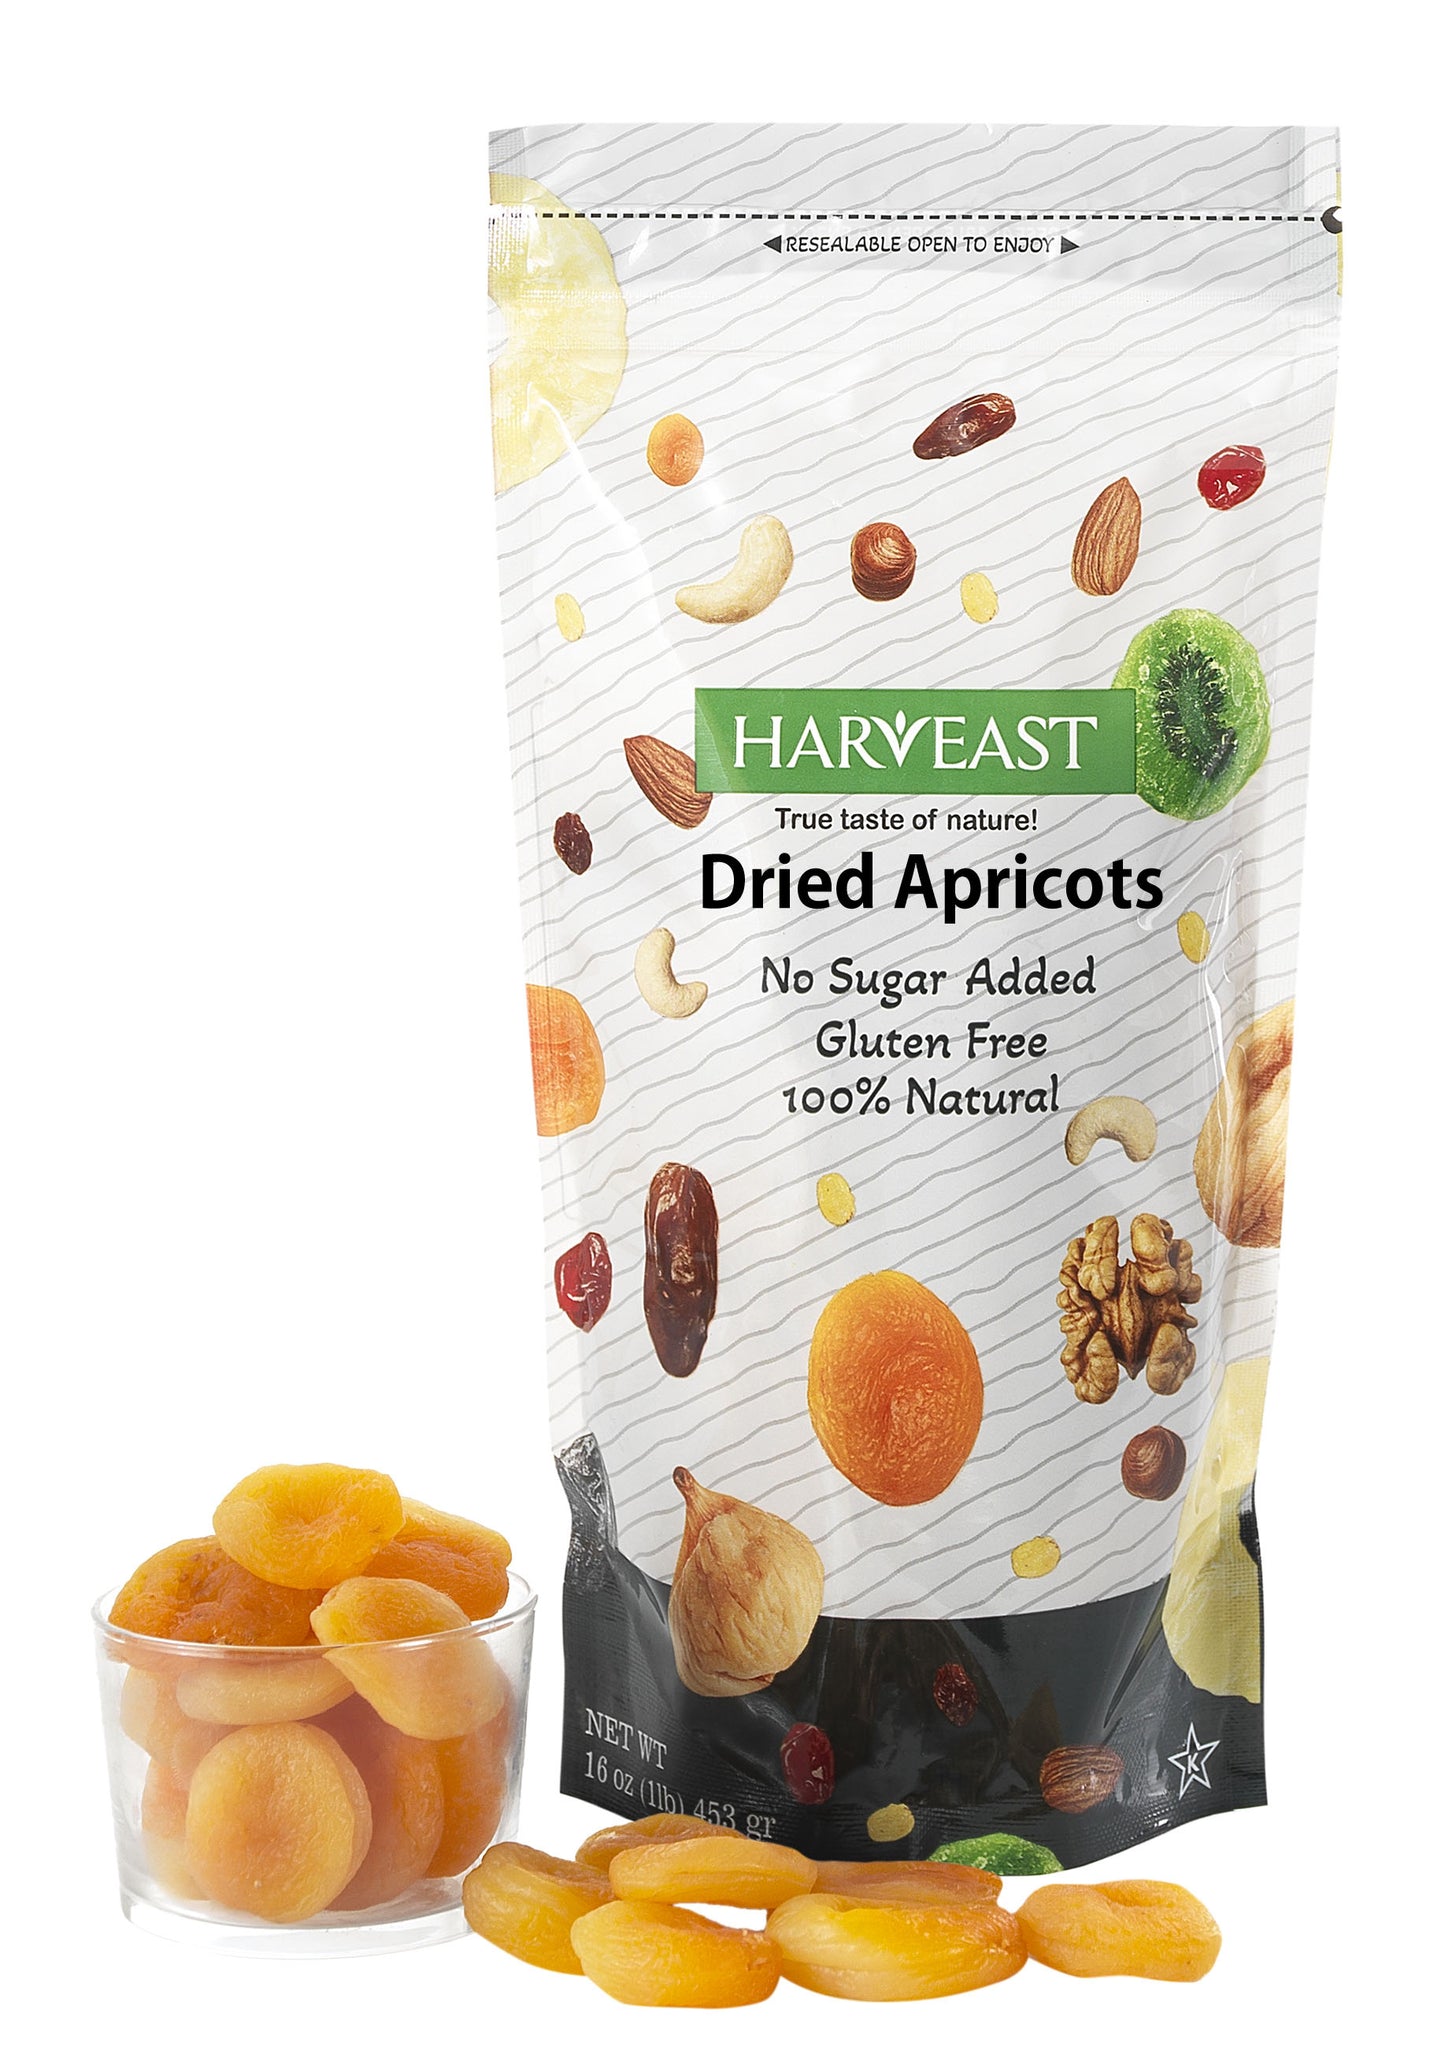 HARVEAST Dried Apricots - Turkish Gourmet Dried Jumbo Apricots, No Sugar Added, Gluten Free, Kosher, 100% Natural – Sweet & Fresh Dehydrated Apricots Vegan Snack in Resalable Bag (1 Lb)